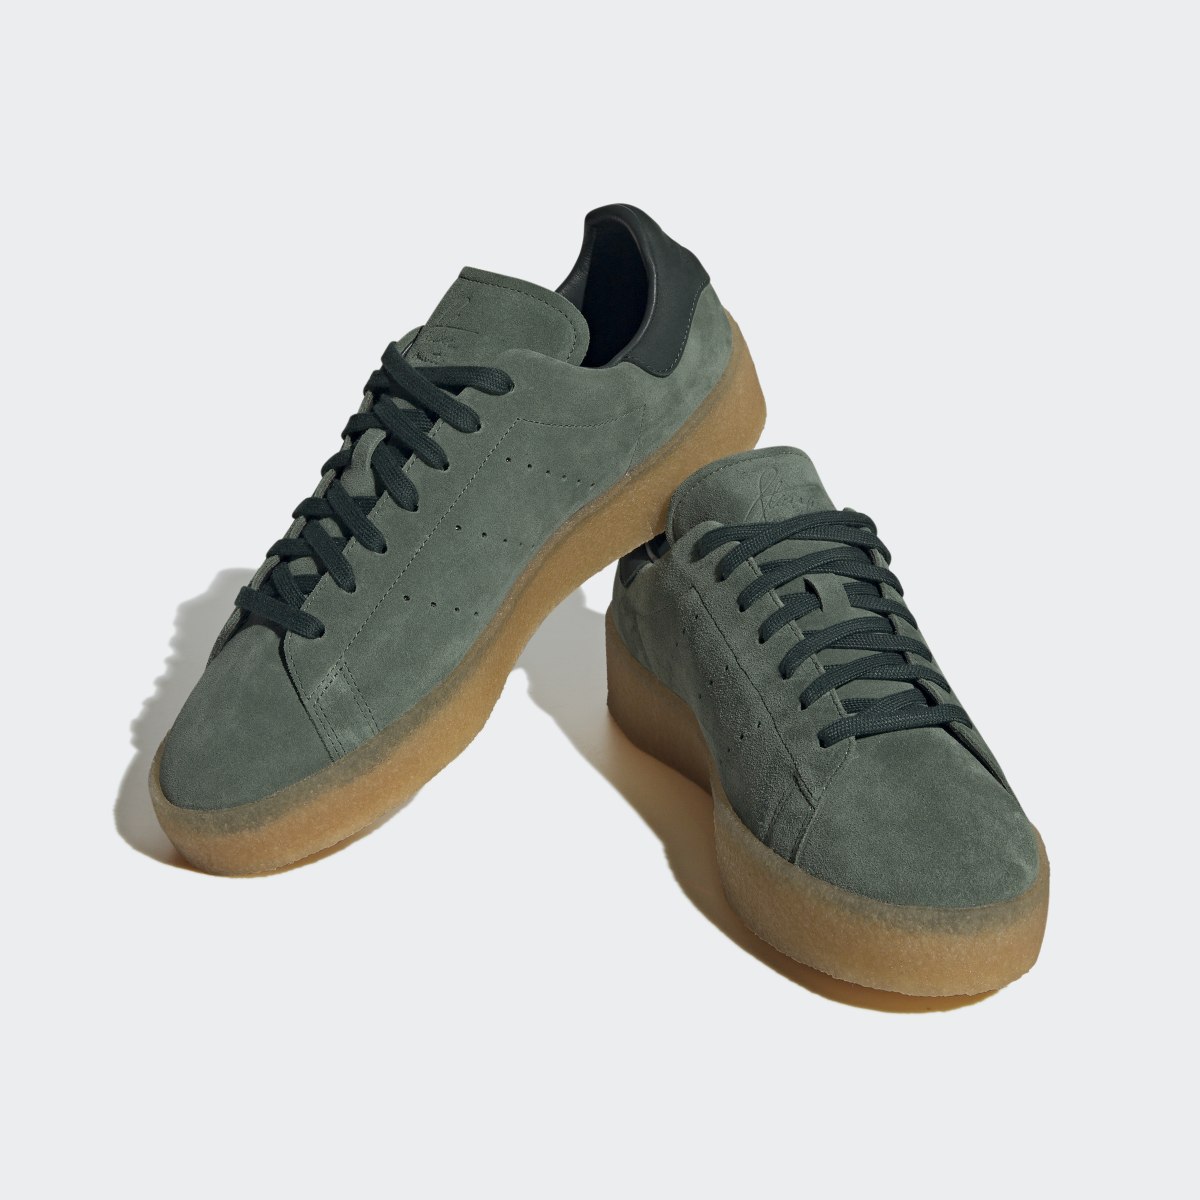 Adidas Stan Smith Crepe Shoes. 5